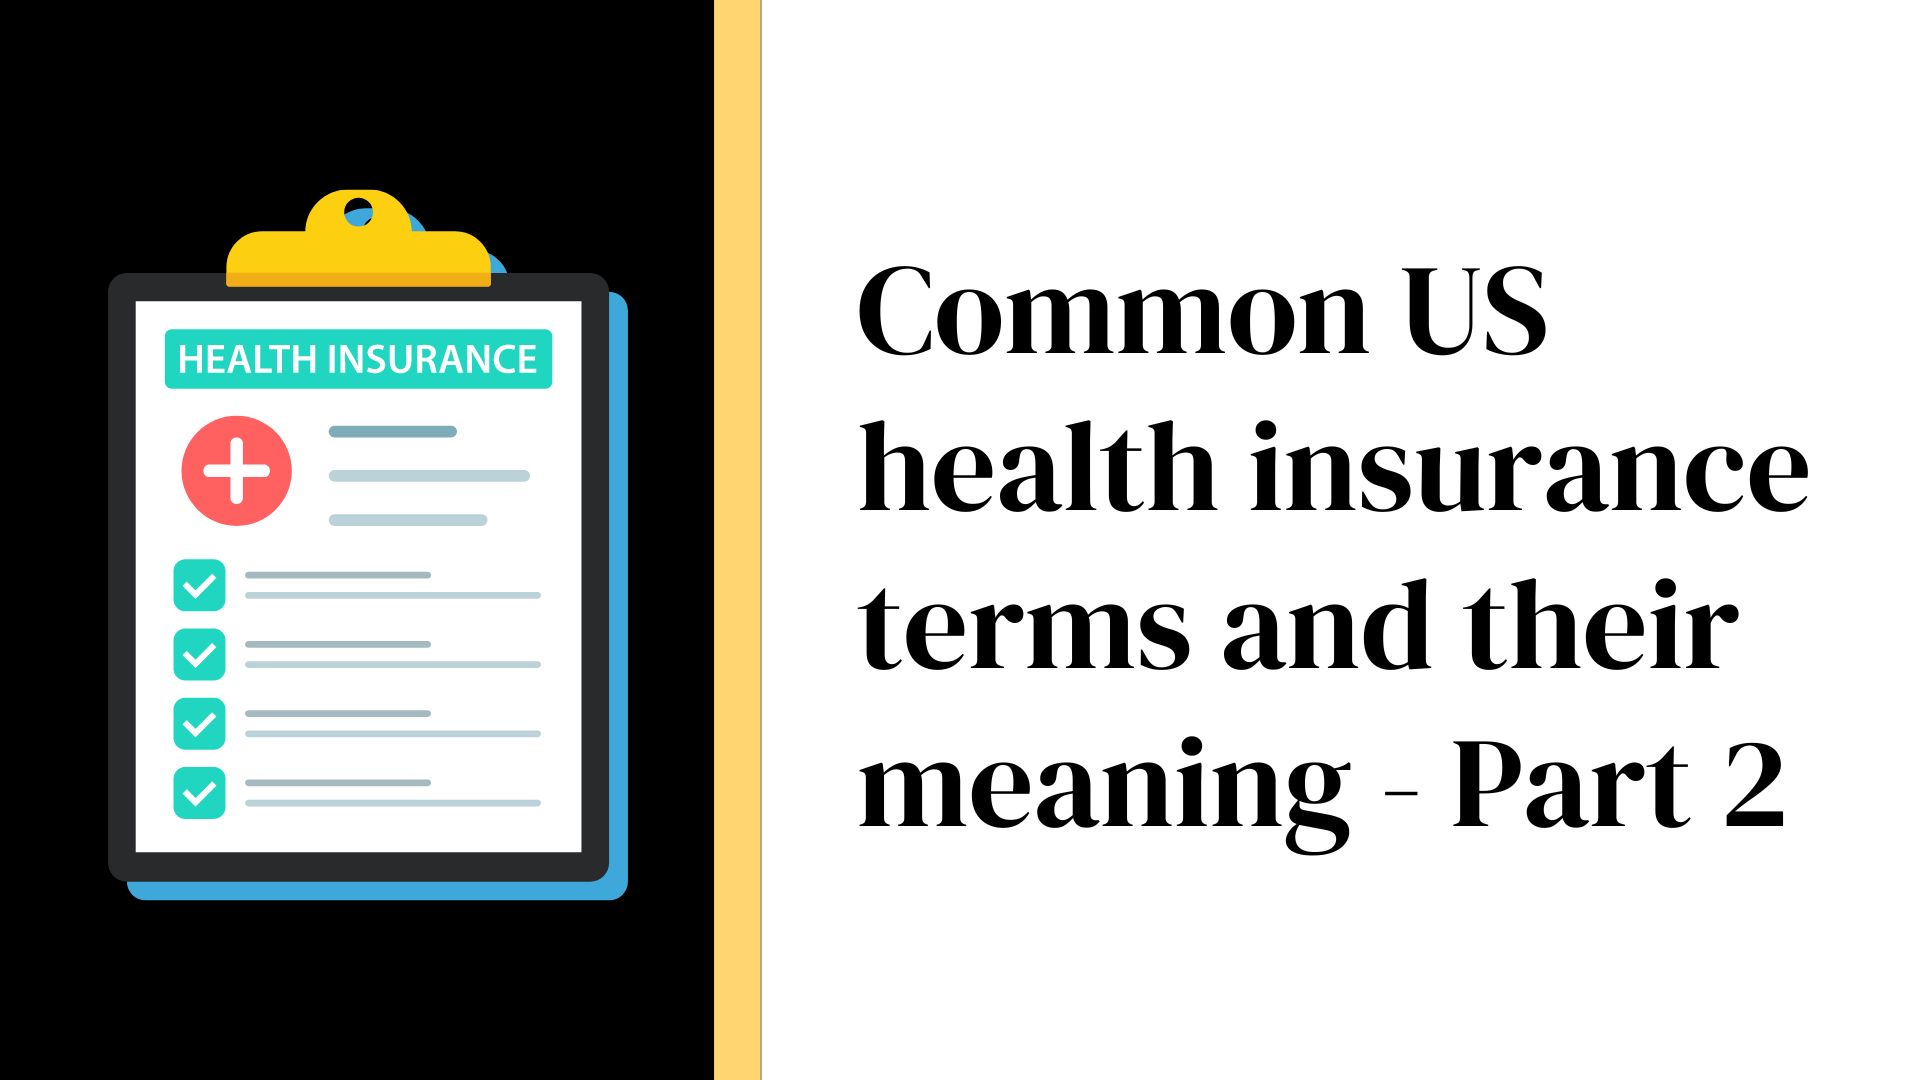 Common US health insurance terms and their meaning - Part 2